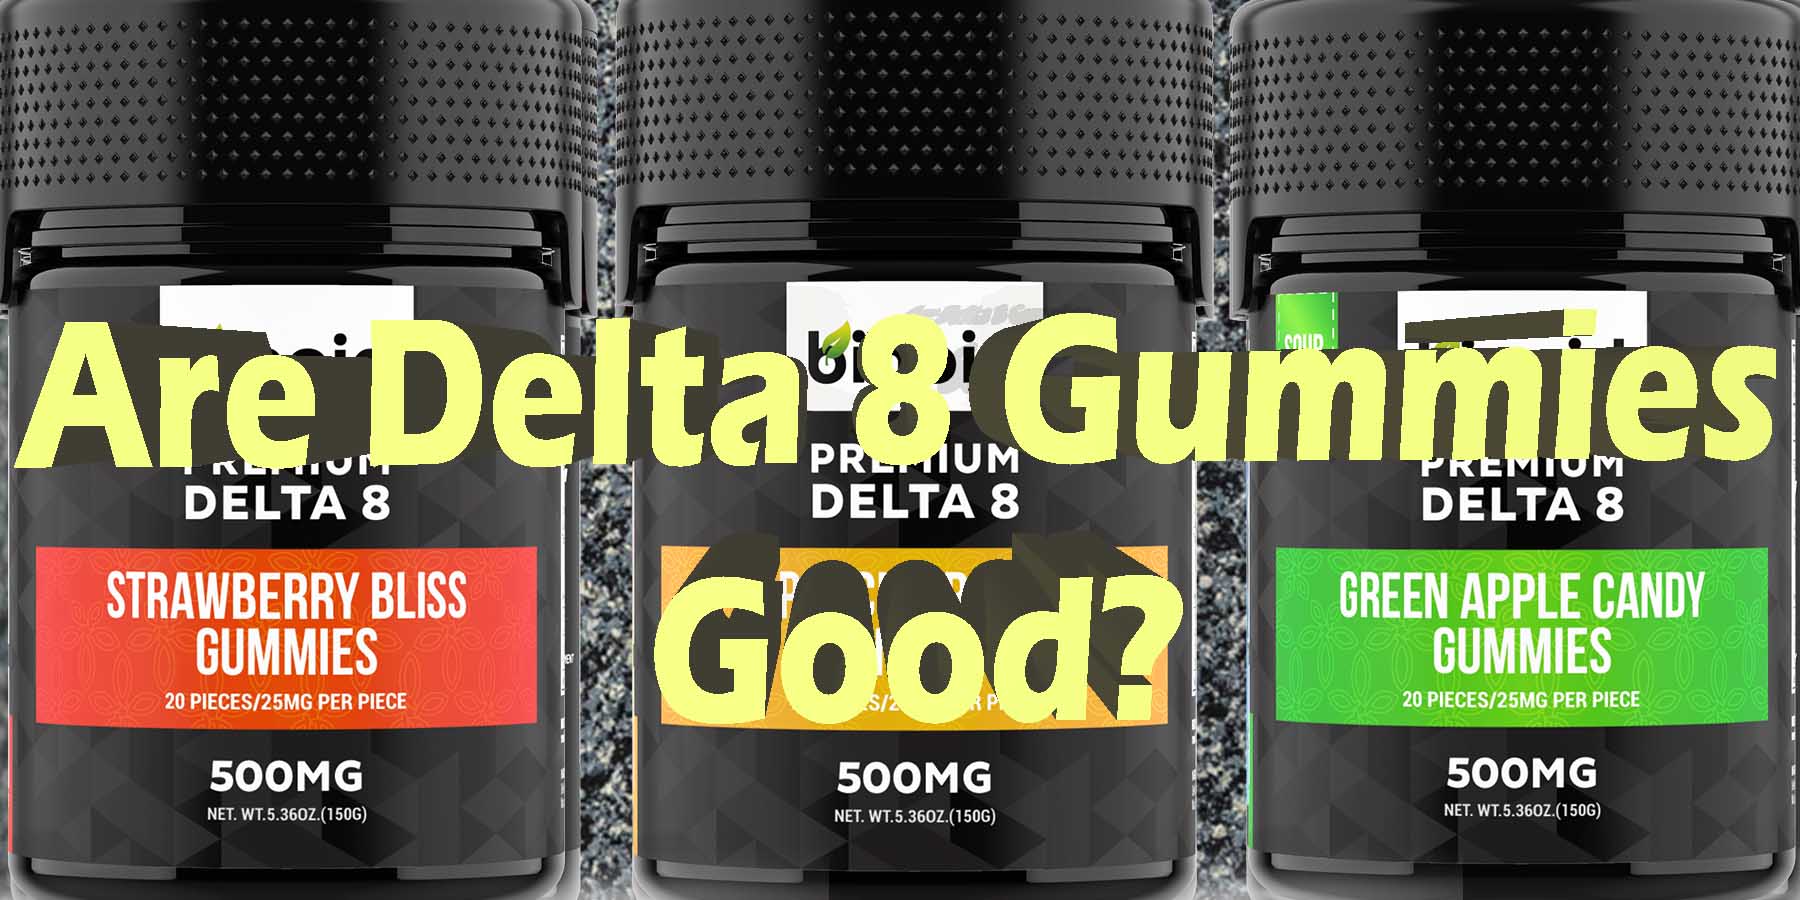 Are Delta 8 Gummies Good WhereToGet HowToBuy BestPrice GetNearMe Lowest Coupon DiscountStore ShopOnline Quality Legal Binoid For Sale-Review ShopBinoid.